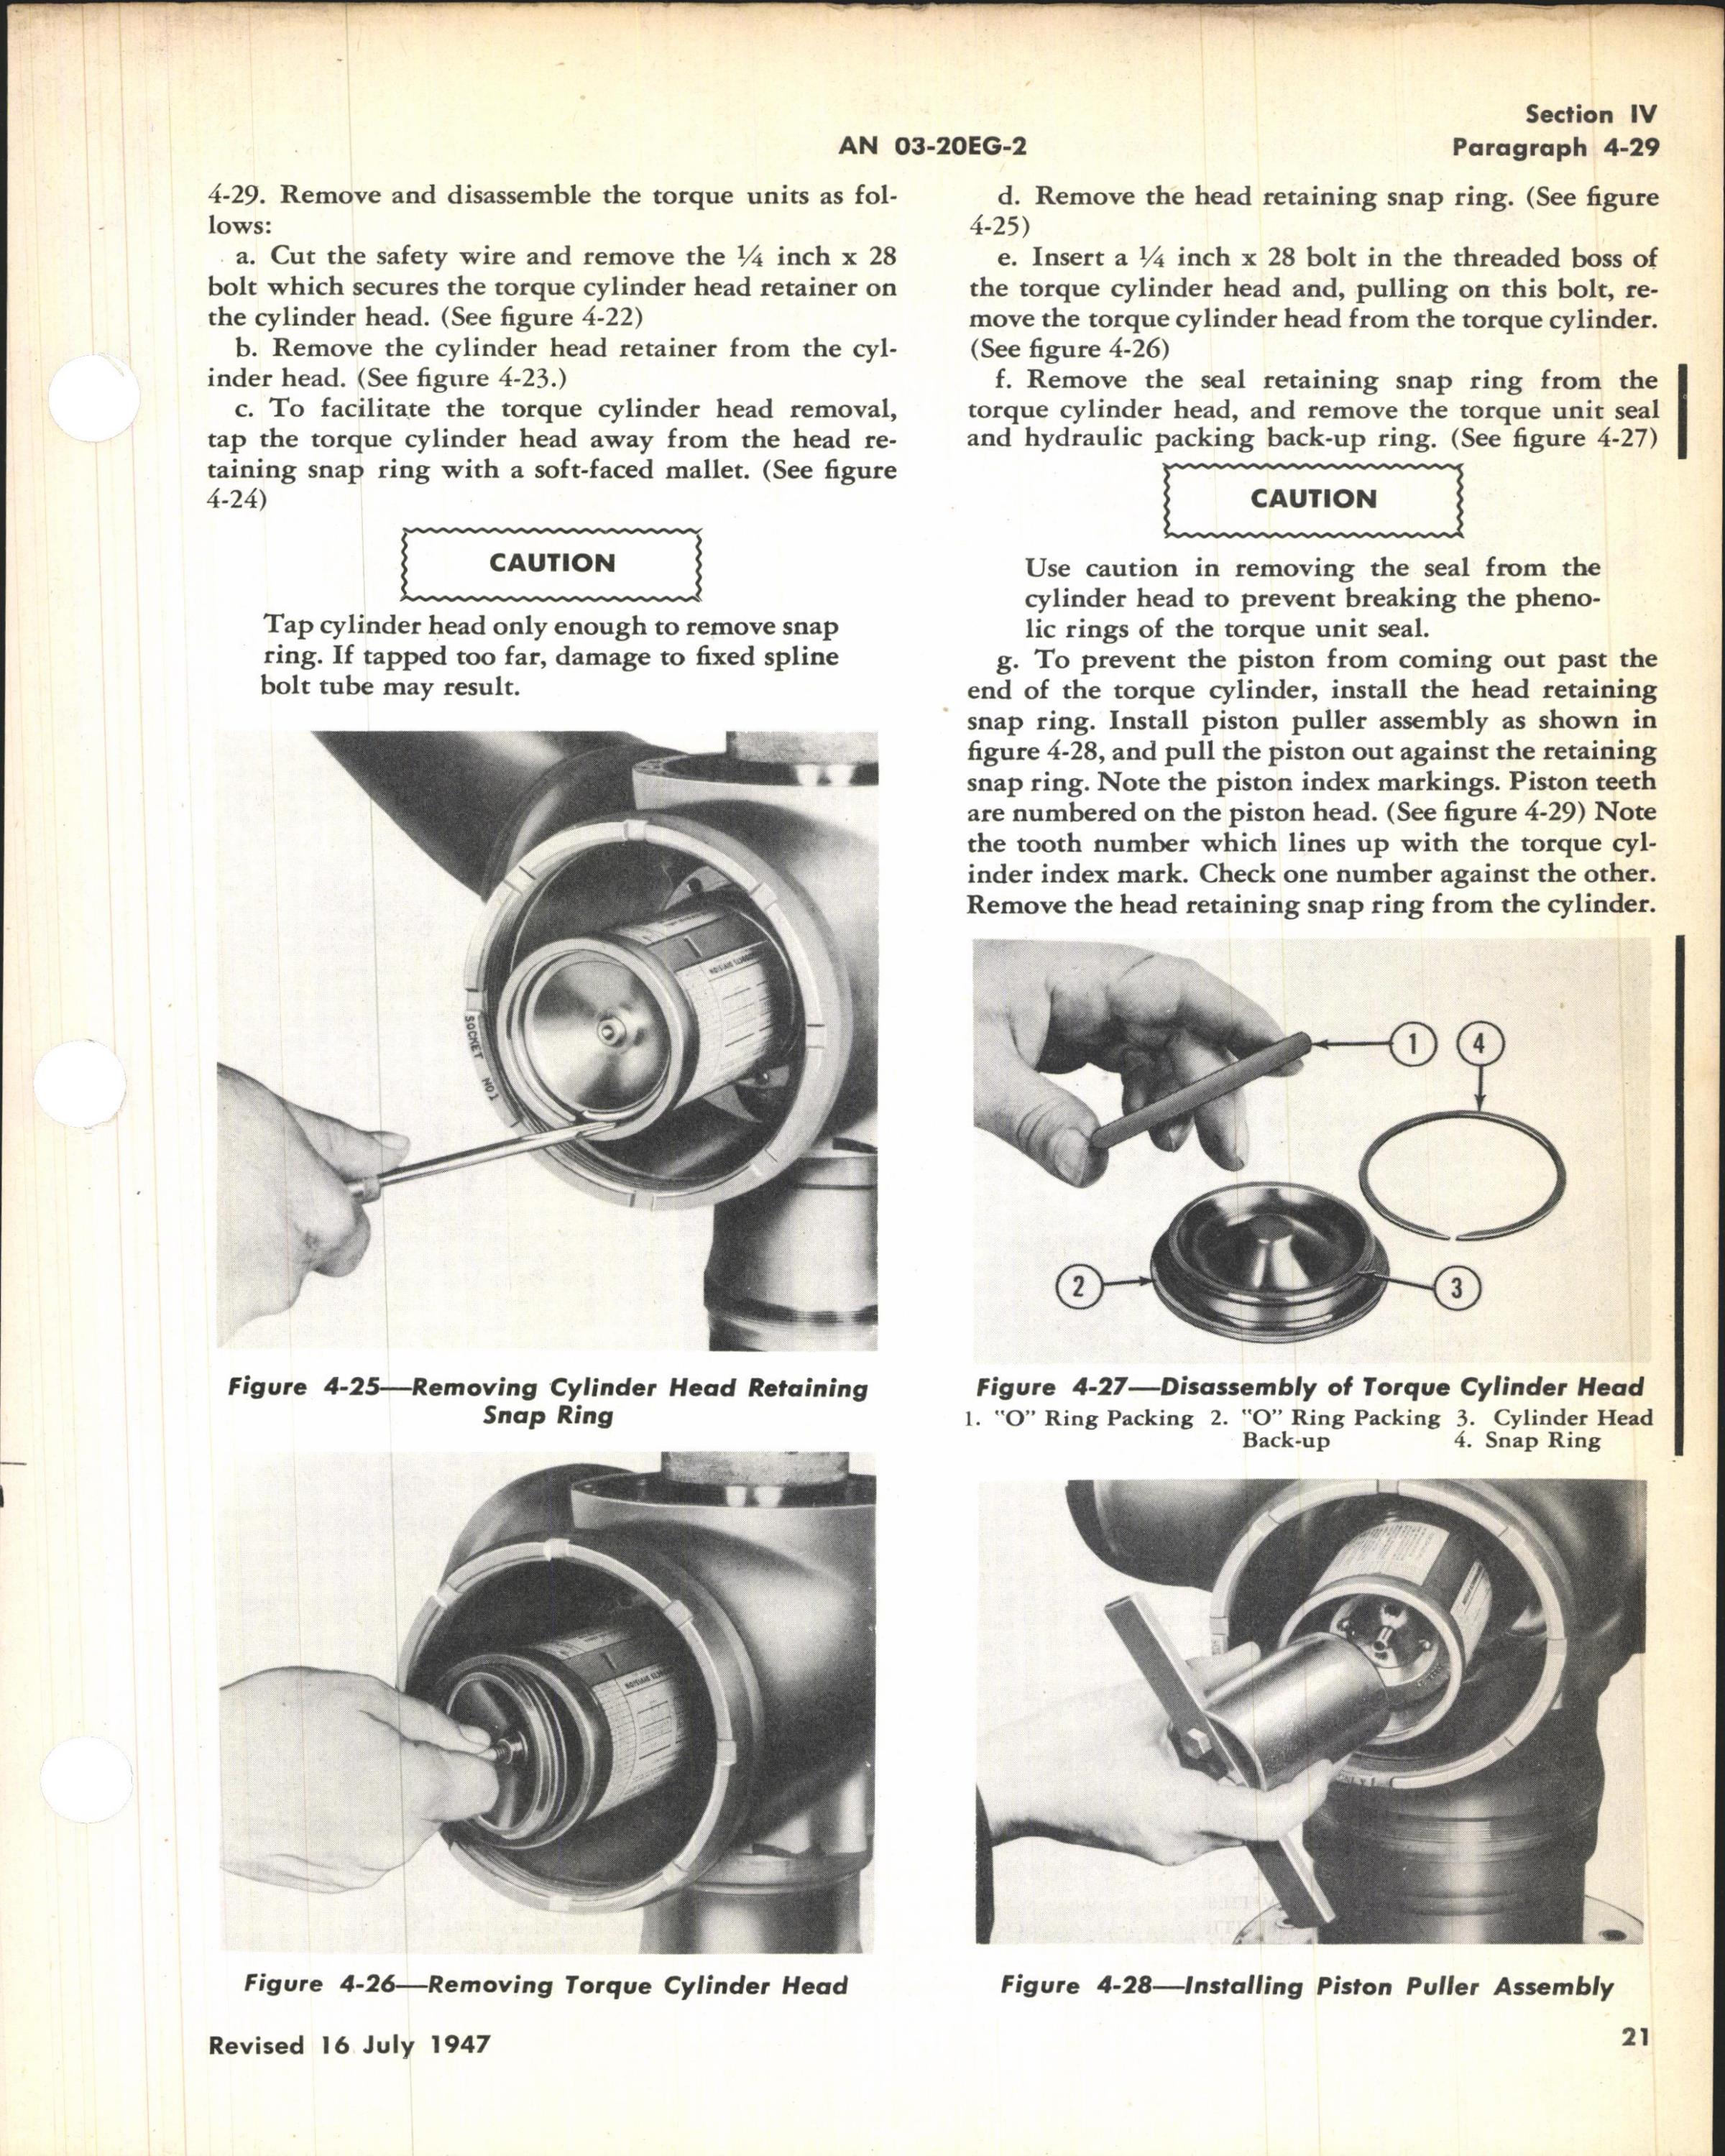 Sample page 3 from AirCorps Library document: Overhaul Instructions for Constant Speed Full Feathering Propeller Models A542F-D1 and AL542F-D1